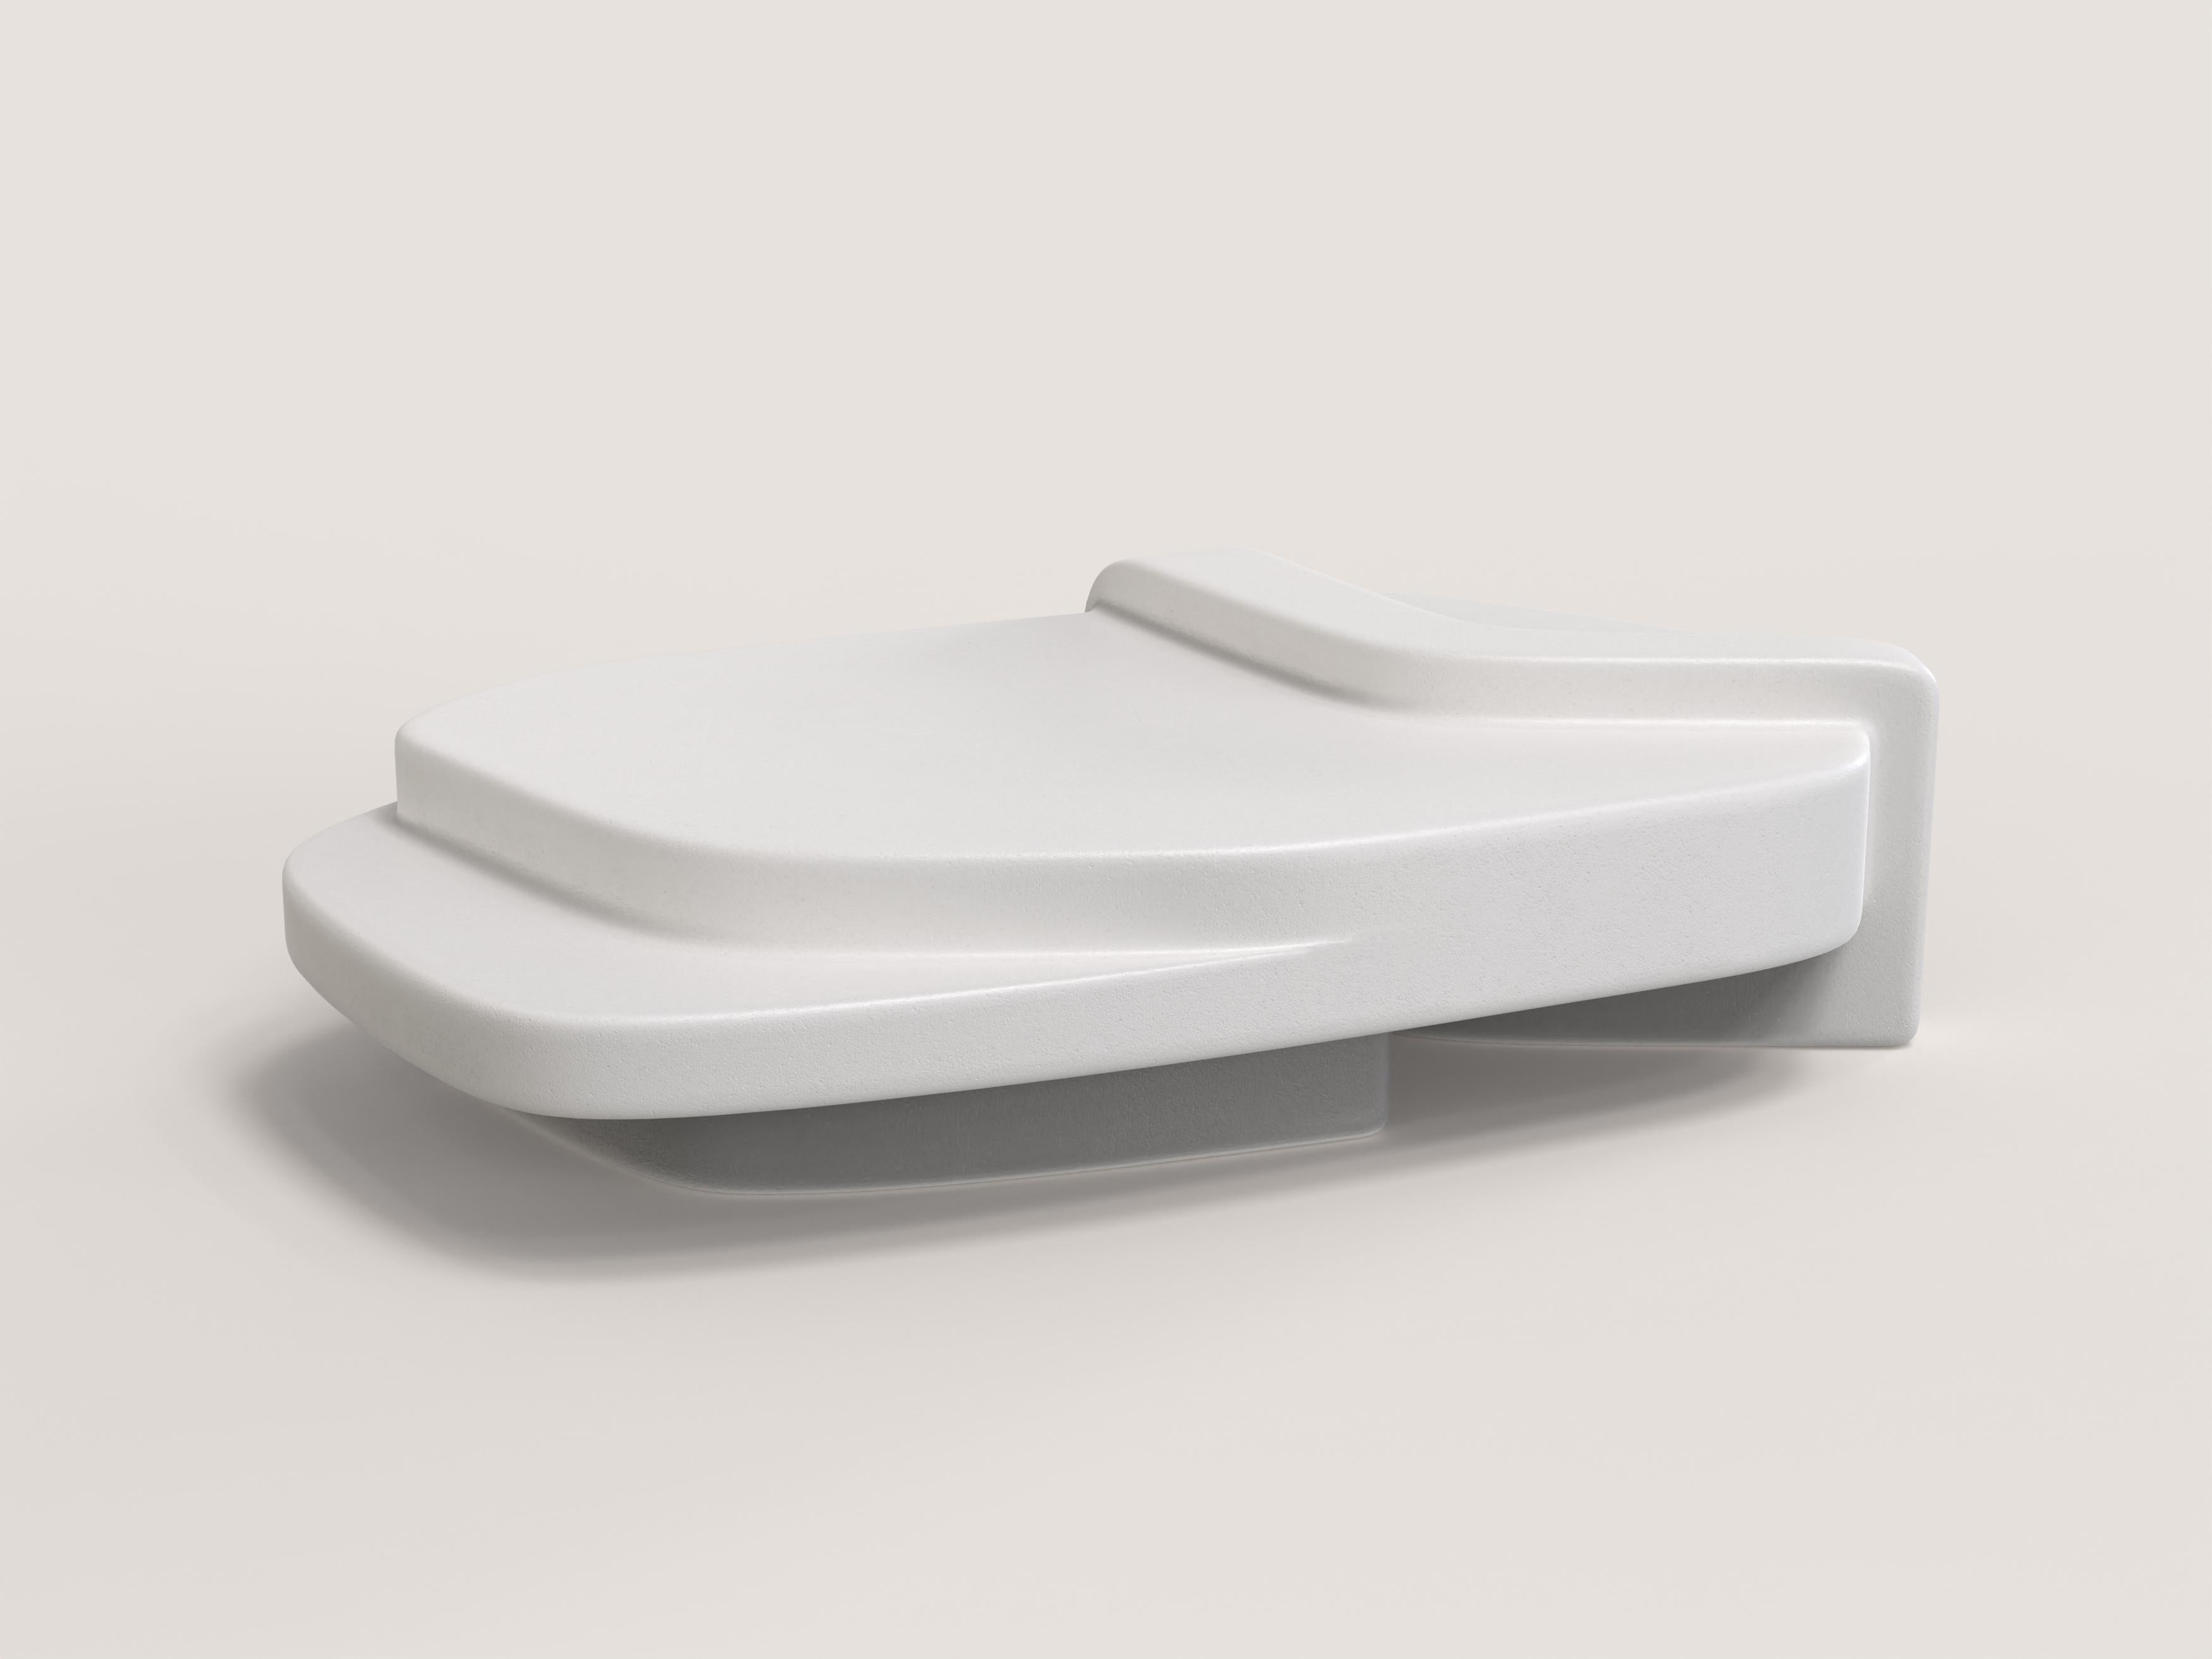 Rodi V1 Low Table by Edizione Limitata
Limited Edition of 150 pieces. Signed and numbered.
Dimensions: D 119 x W 79 x H 30 cm.
Materials: Resin-coated polystyrene.

Rodi are contemporary low tables made by Italian artisans in painted and spray